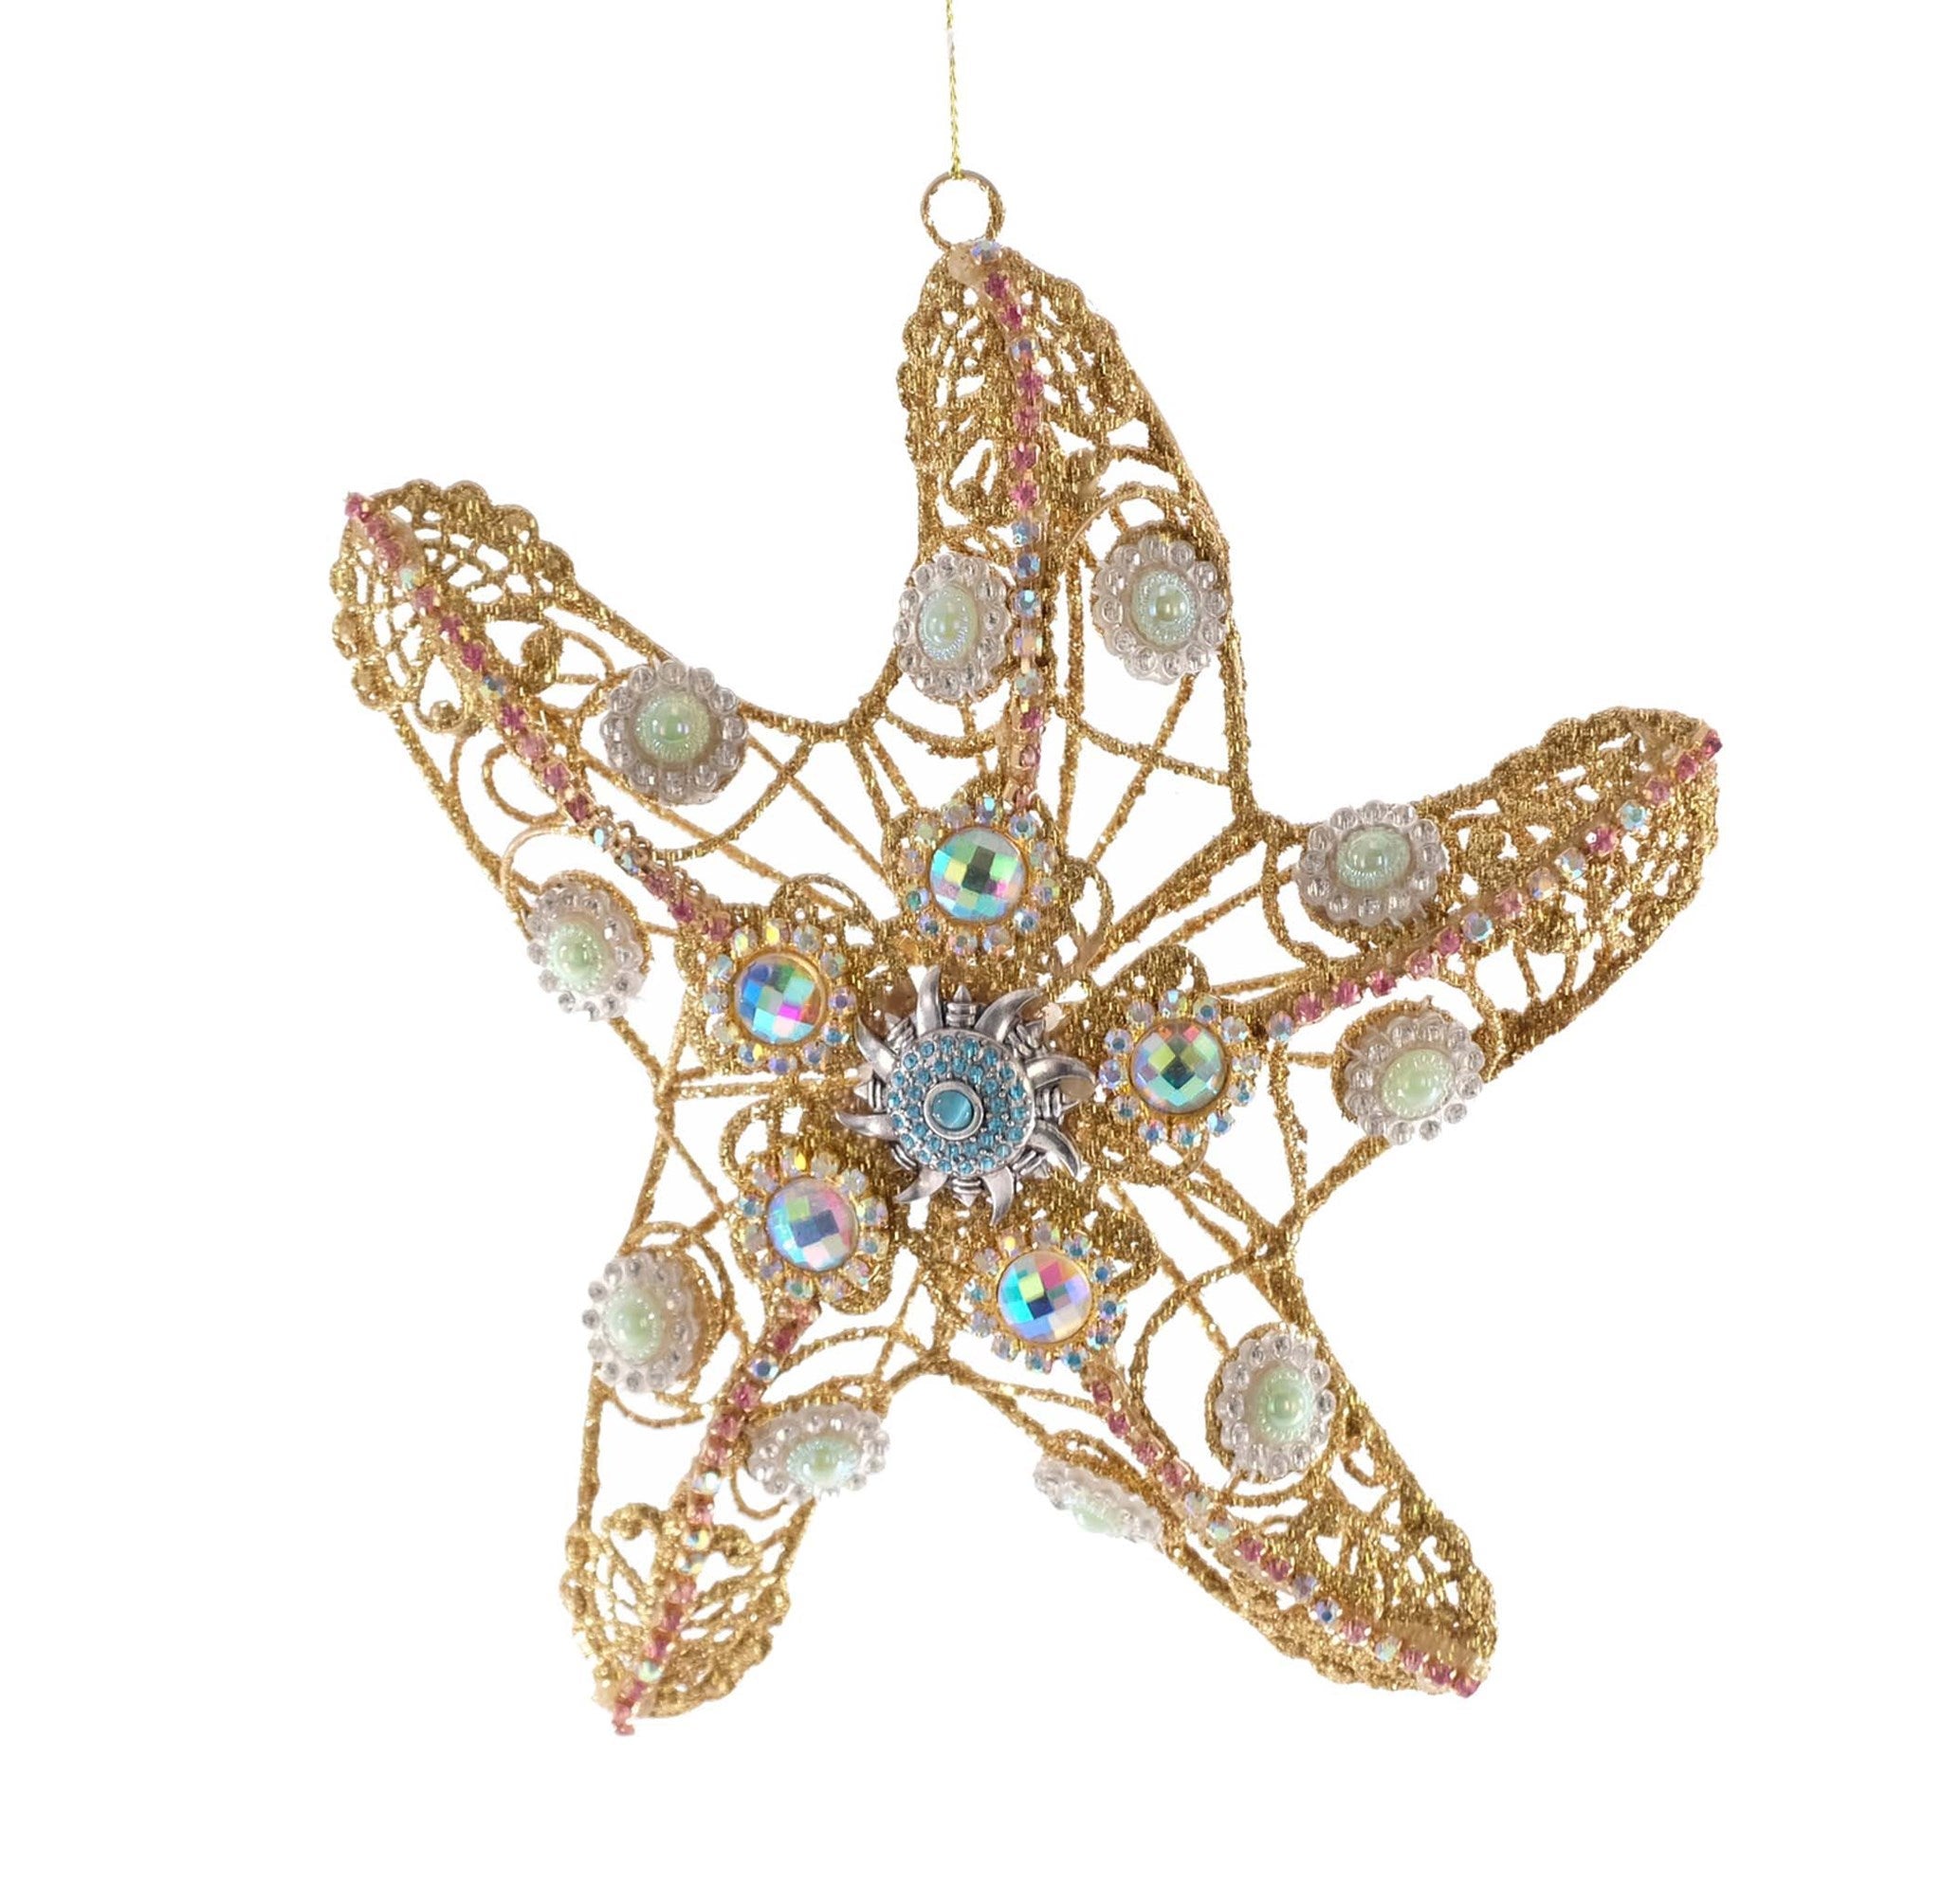 Treasures of the Sea Starfish Ornament by Katherine's Collection